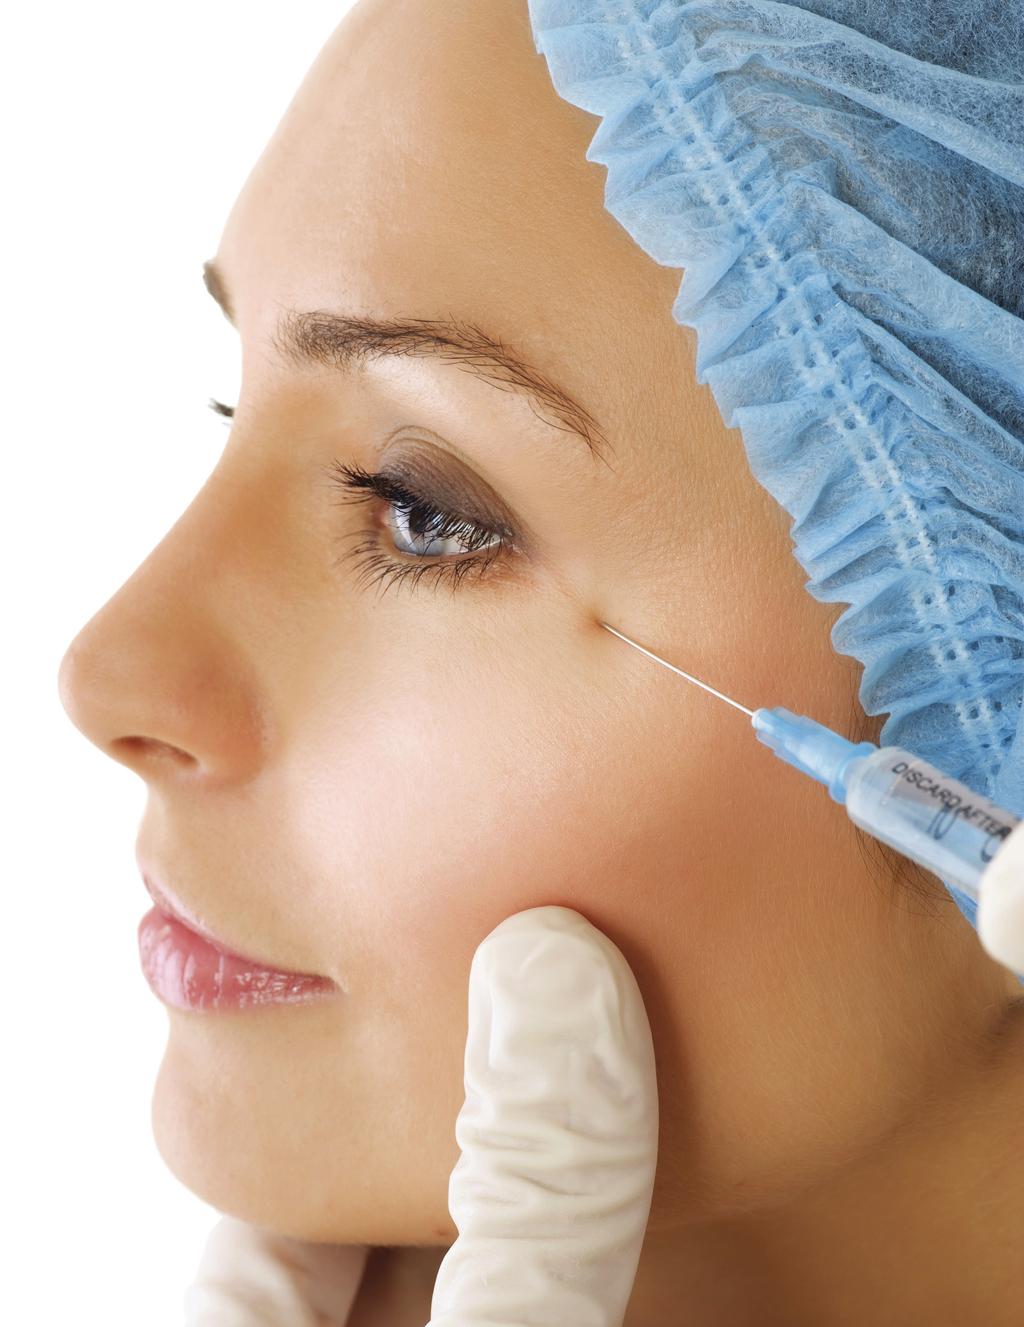 Botox Hyalouronic Acid fillers Sculptra Volumetric rejuvenation of the face with